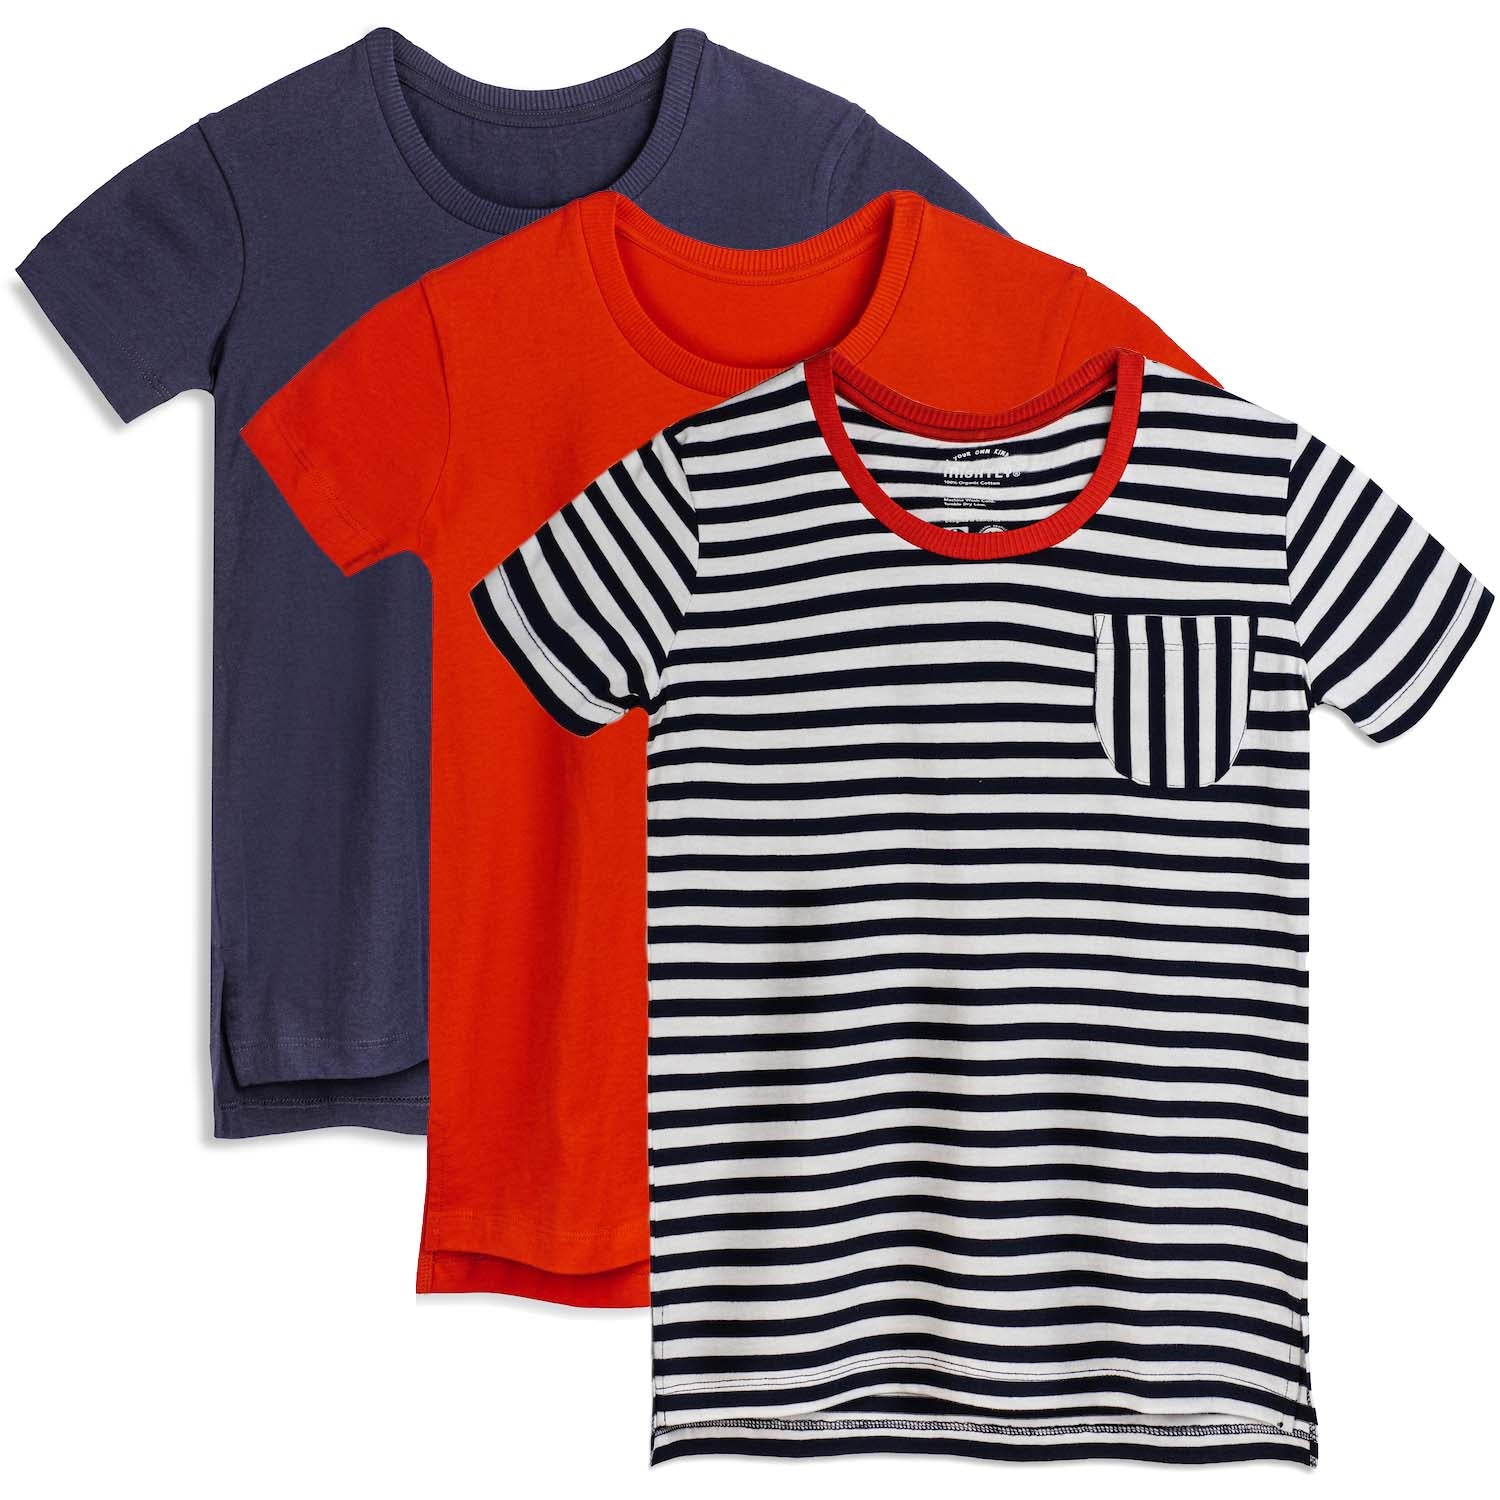 Organic Cotton Kids Shirts Mightly T-Shirts - Pack Length - 3 Extended